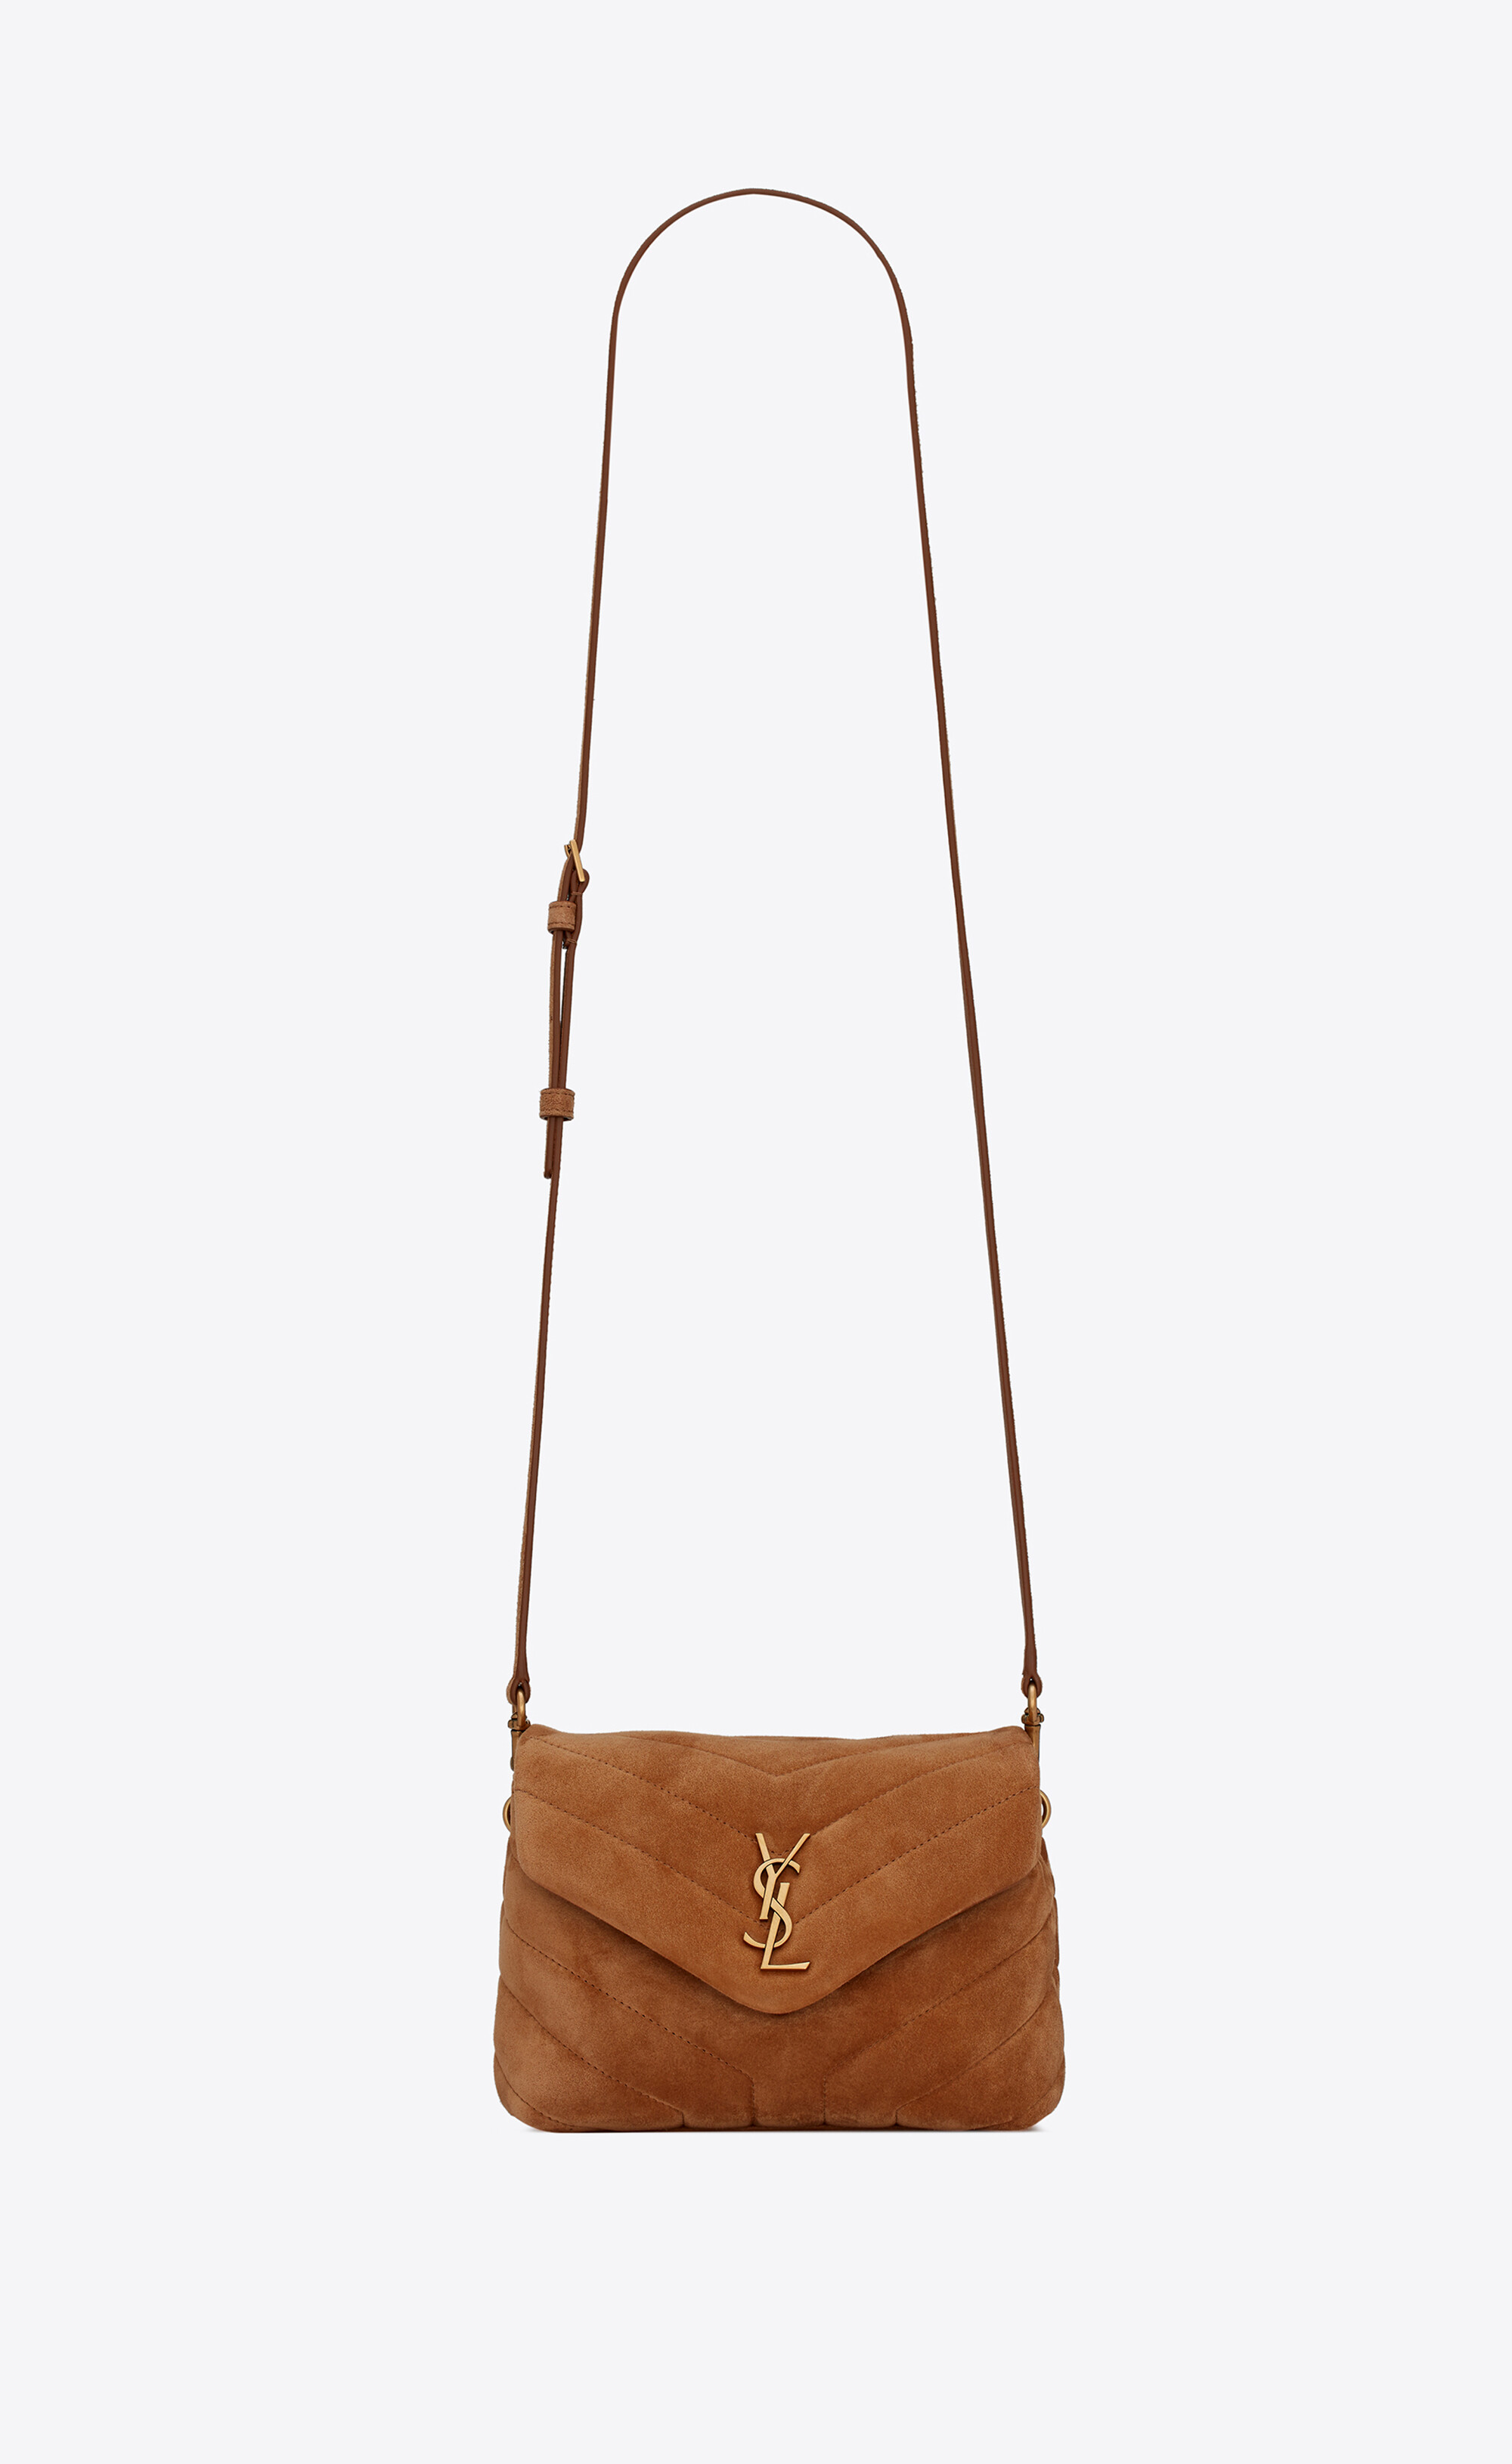 Ysl Loulou Toy Bag Outfit Belgium, SAVE 51% 